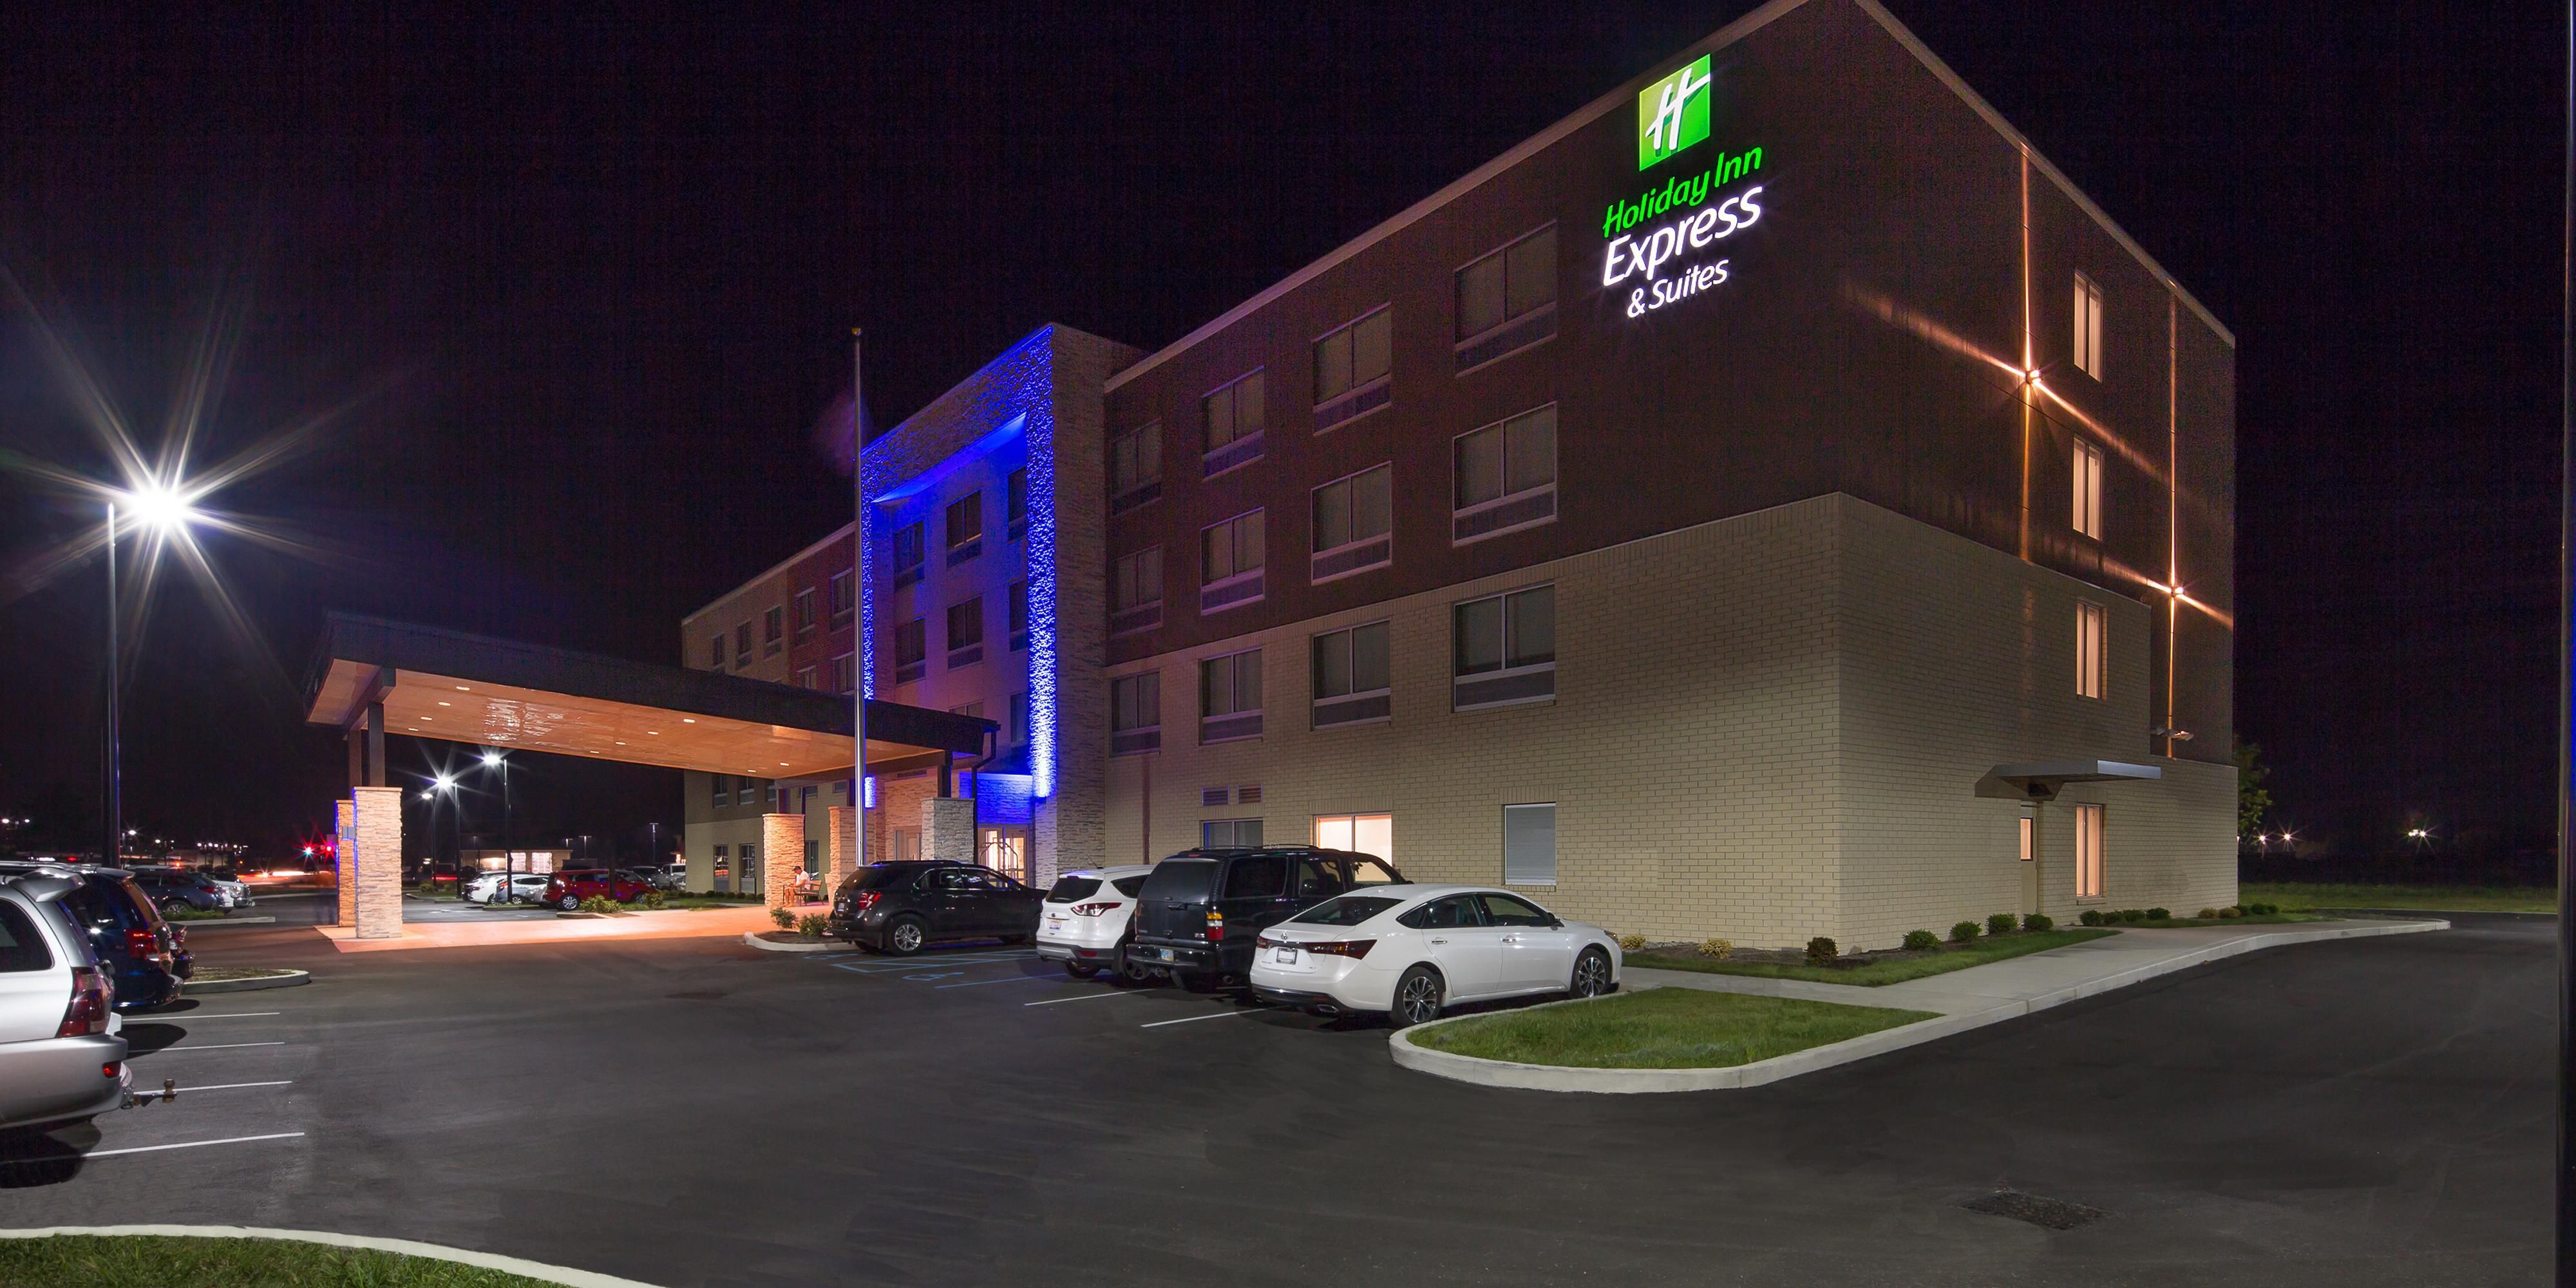 Photo of Holiday Inn Express & Suites Indianapolis NW - Zionsville, Whitestown, IN